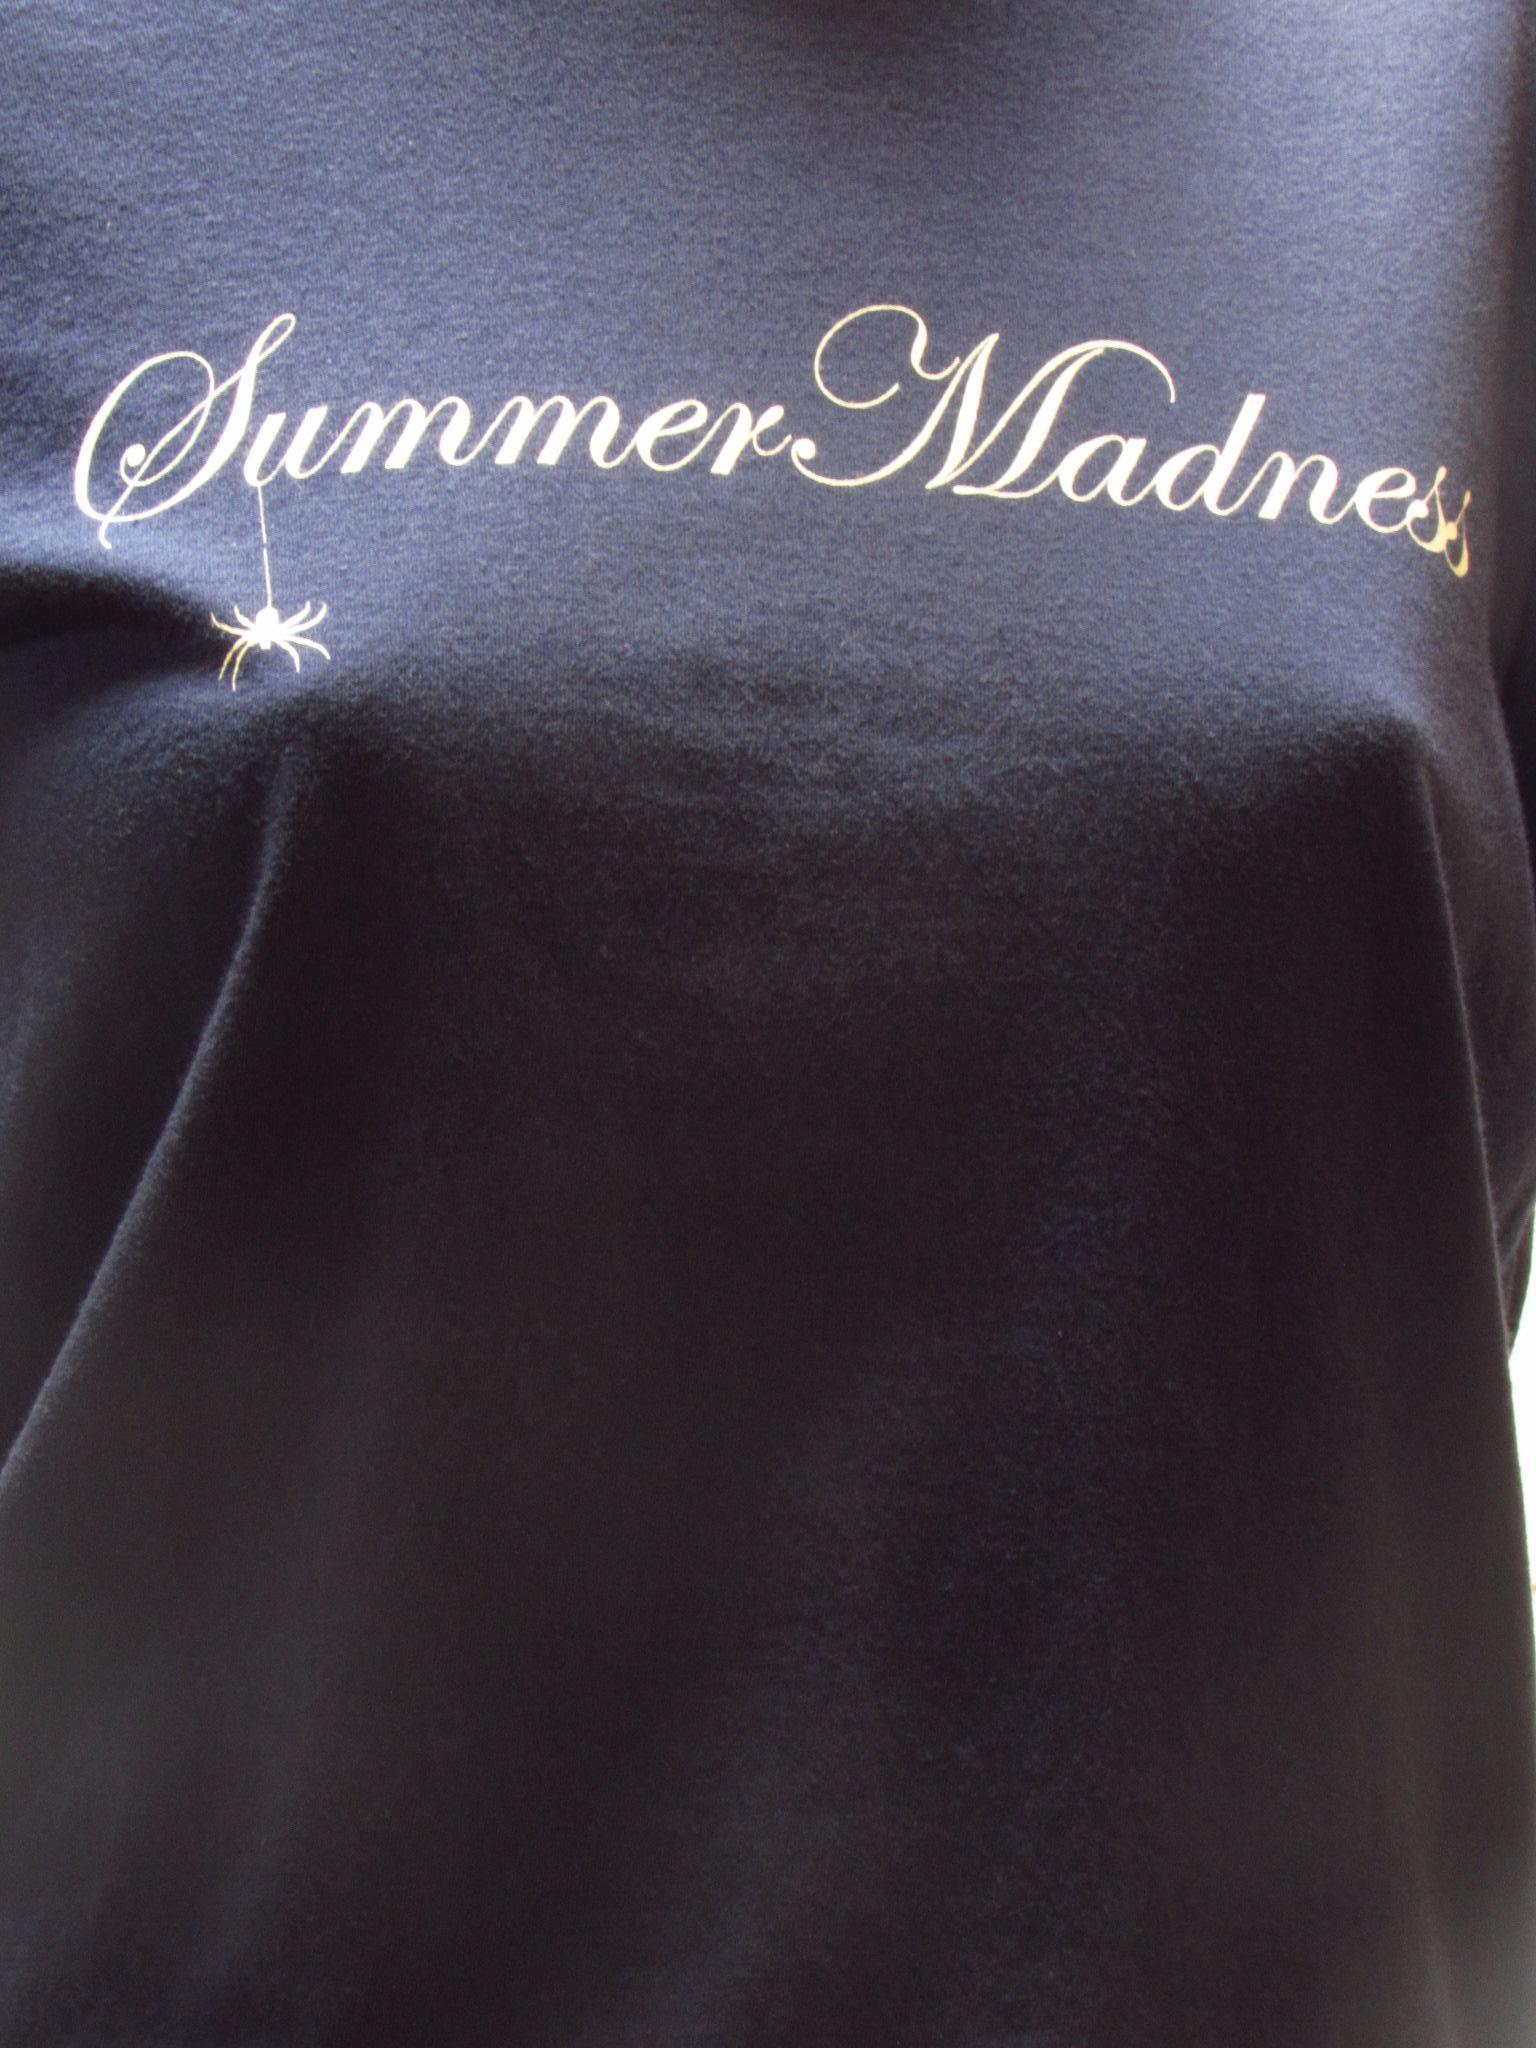 Black Undercover Summer Madness Vintage Tee